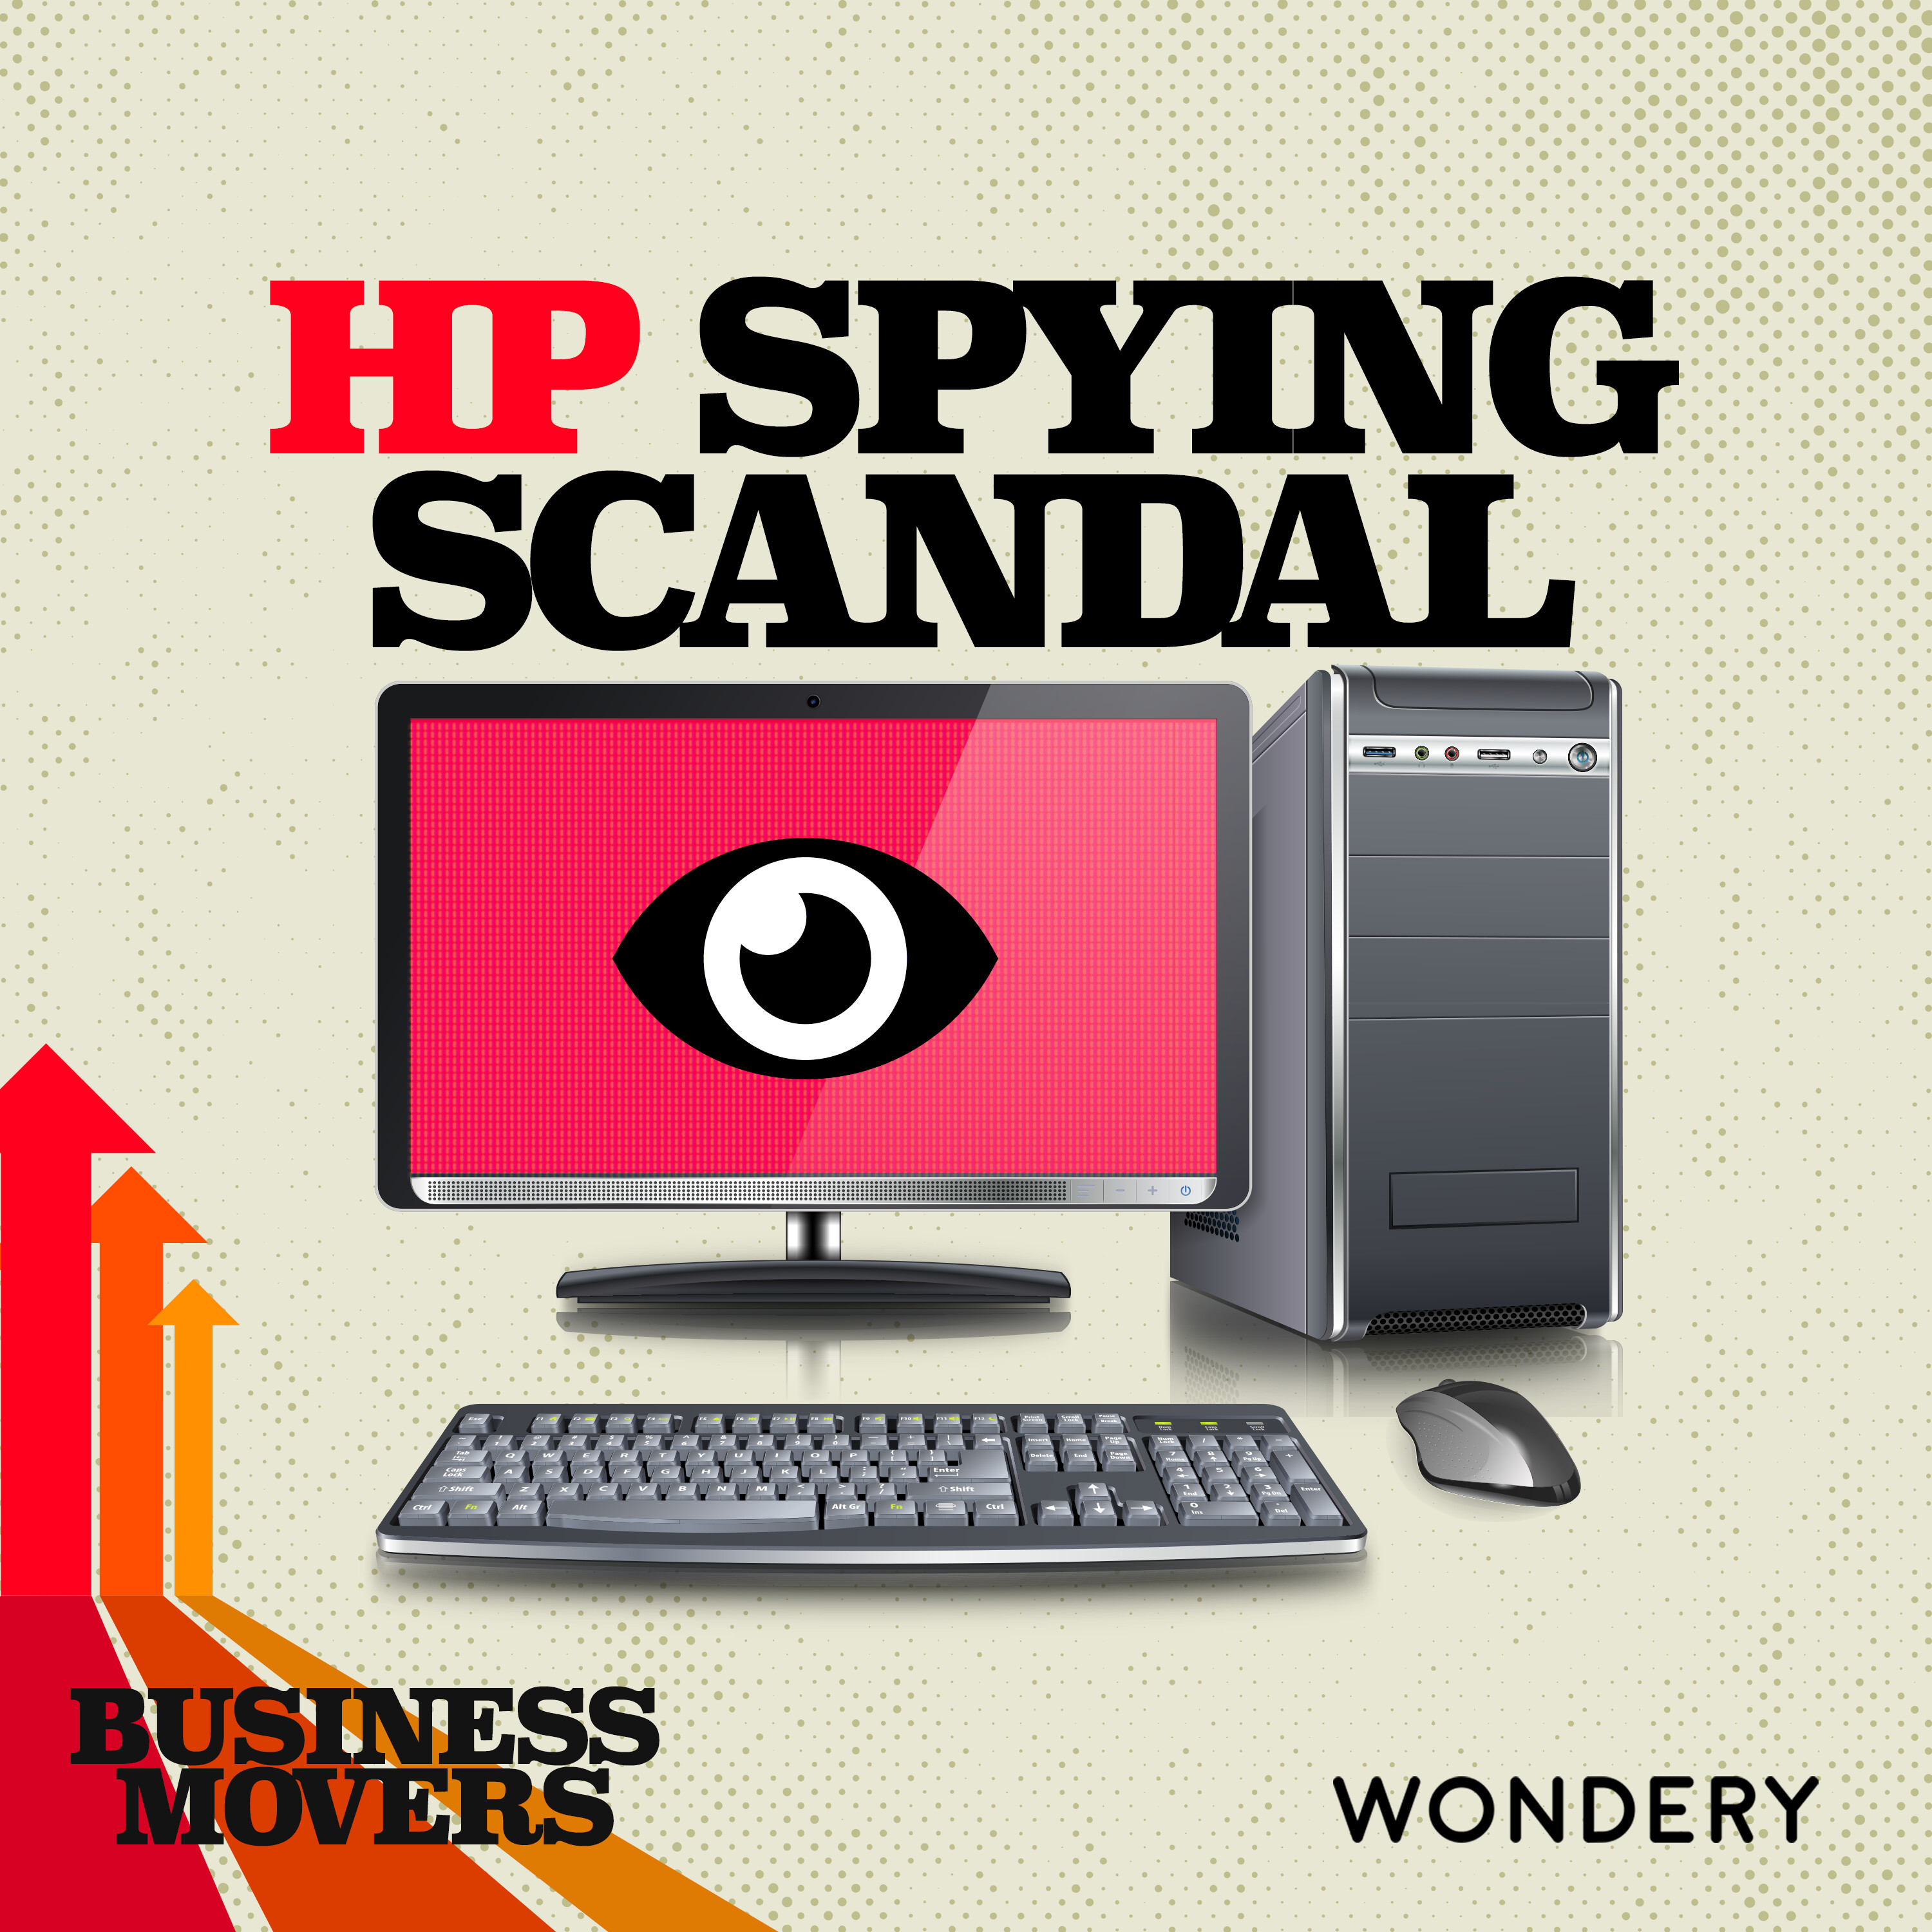 The HP Spying Scandal | The HP Way | 1